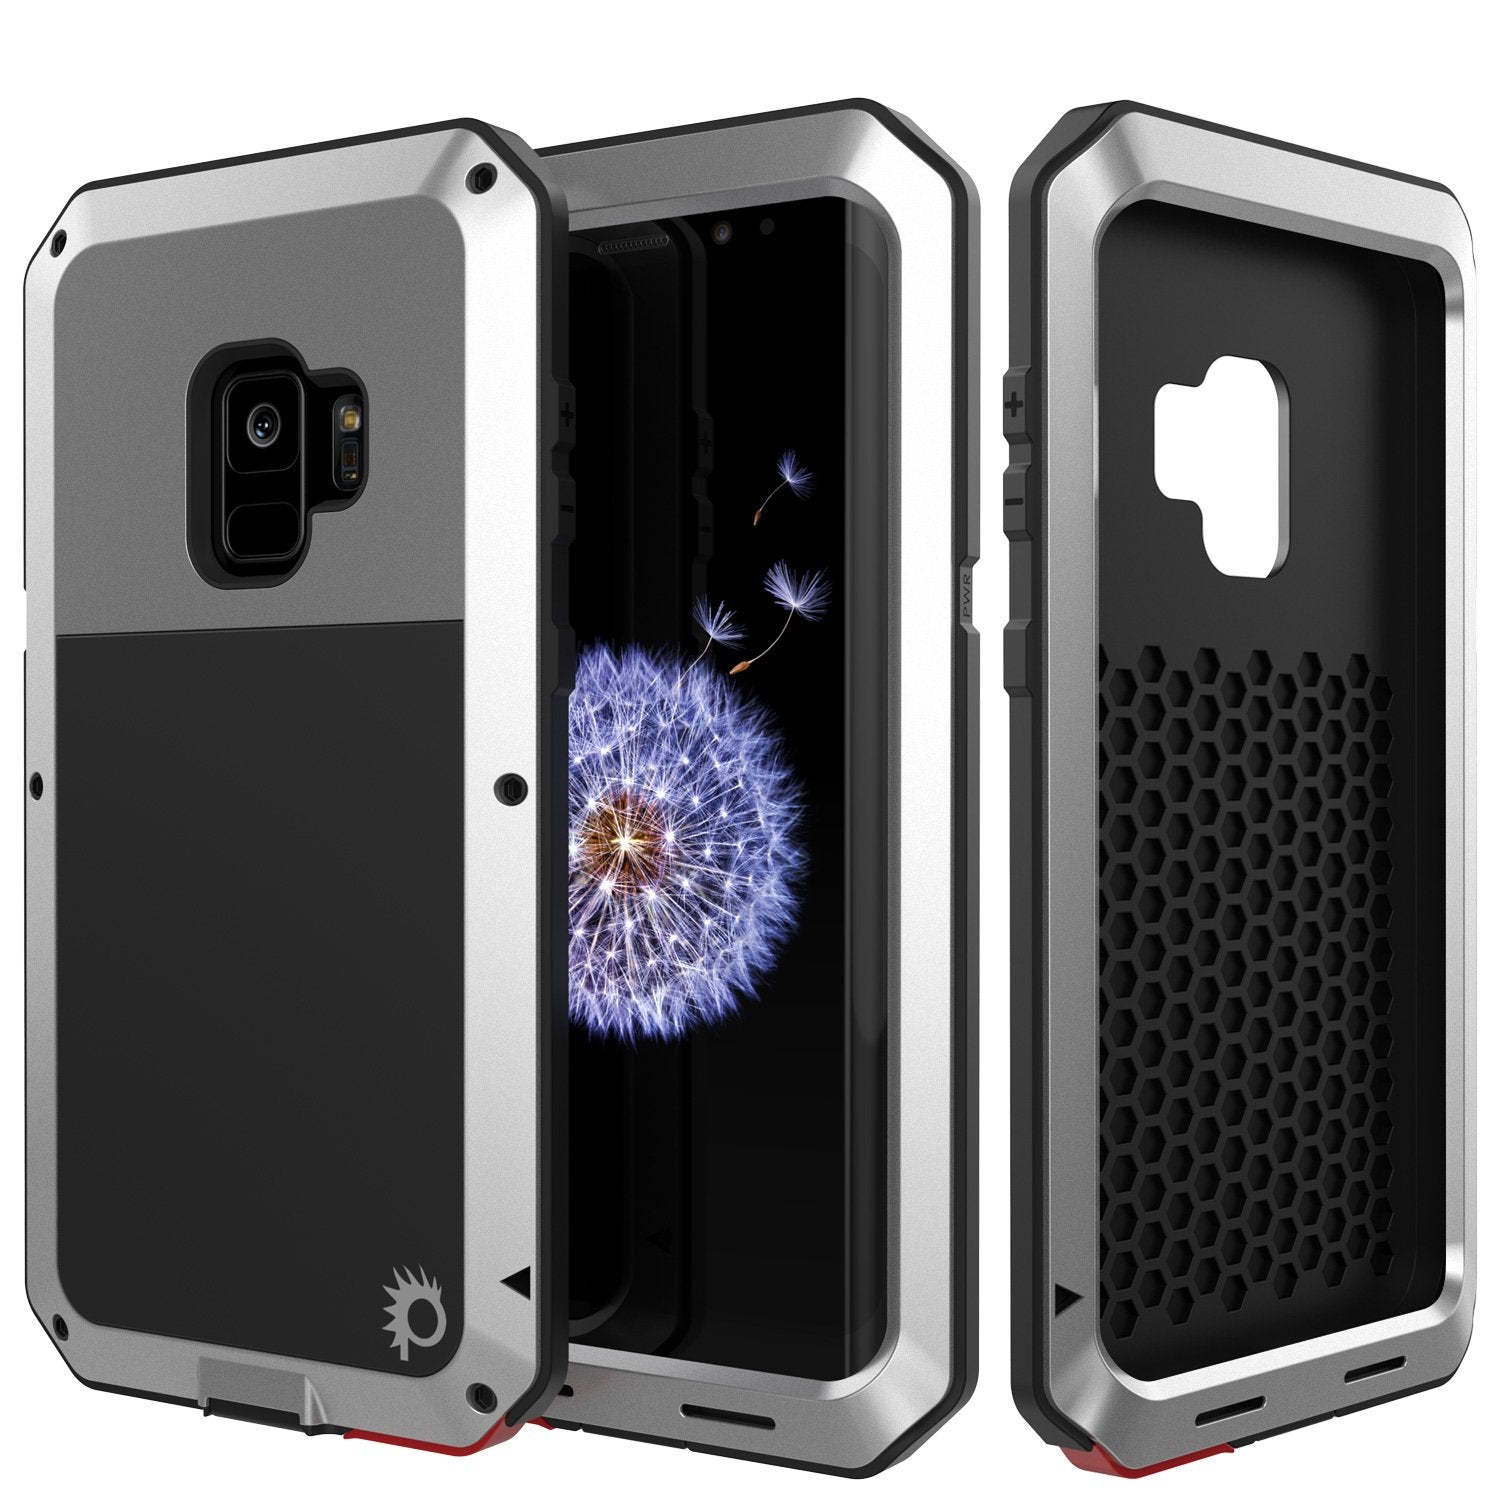 Galaxy S9 Metal Case, Heavy Duty Military Grade Rugged Armor Cover [shock proof] Hybrid Full Body Hard Aluminum & TPU Design [non slip] W/ Prime Drop Protection for Samsung Galaxy S9 [Silver]